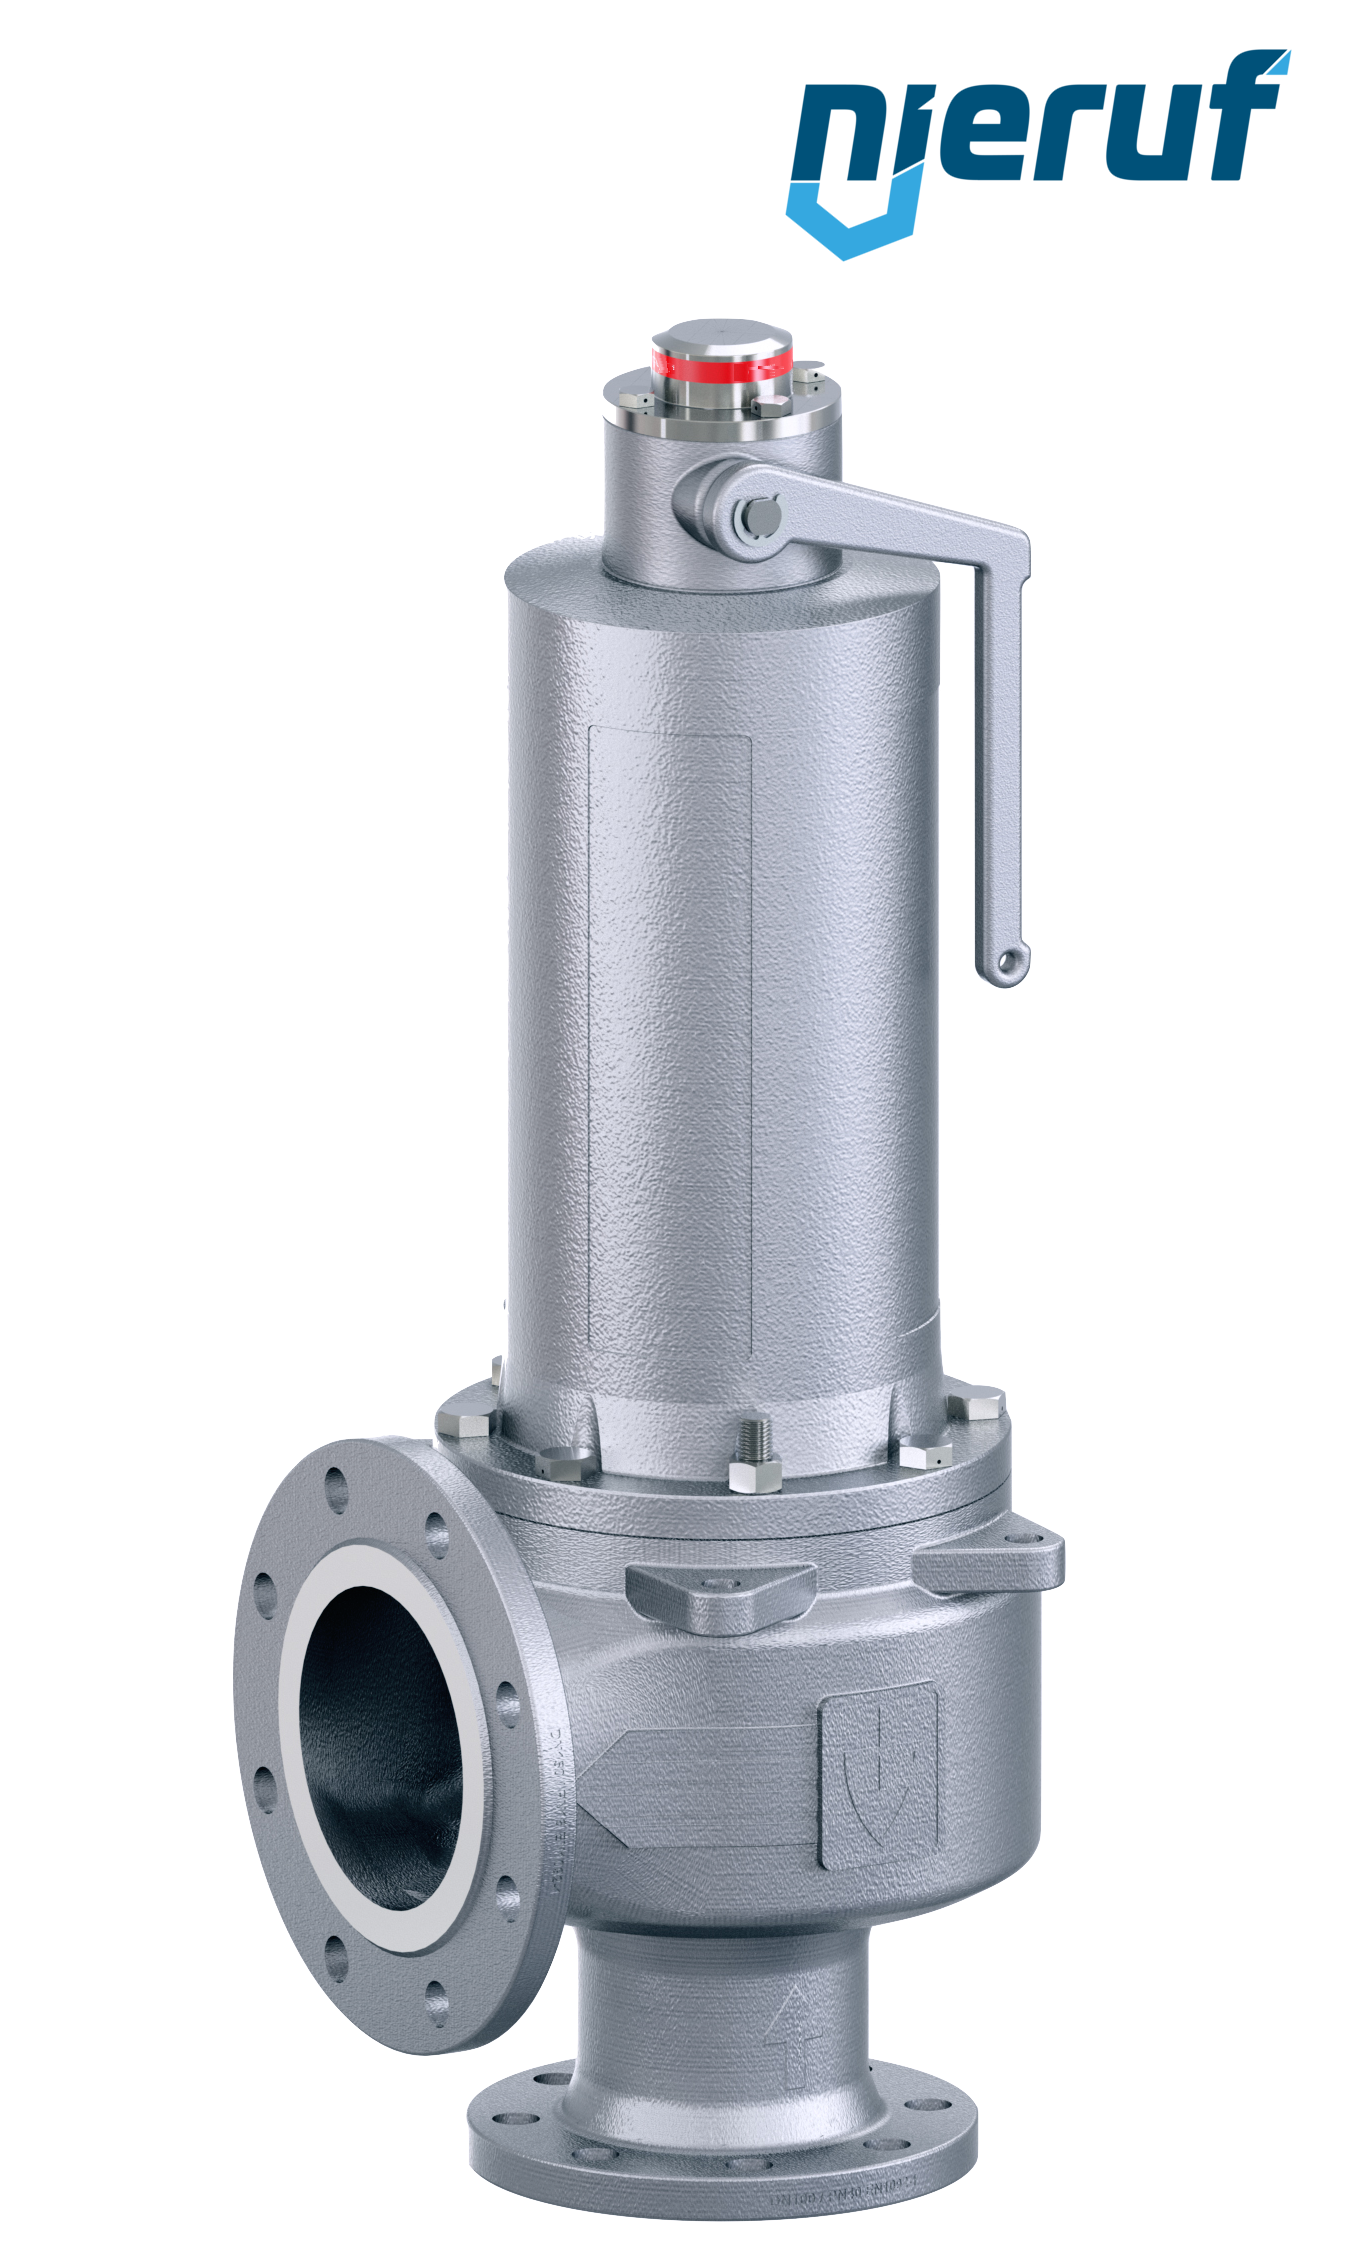 flange-safety valve DN80/DN125 SF04, stainless steel metal, with lifting device lever